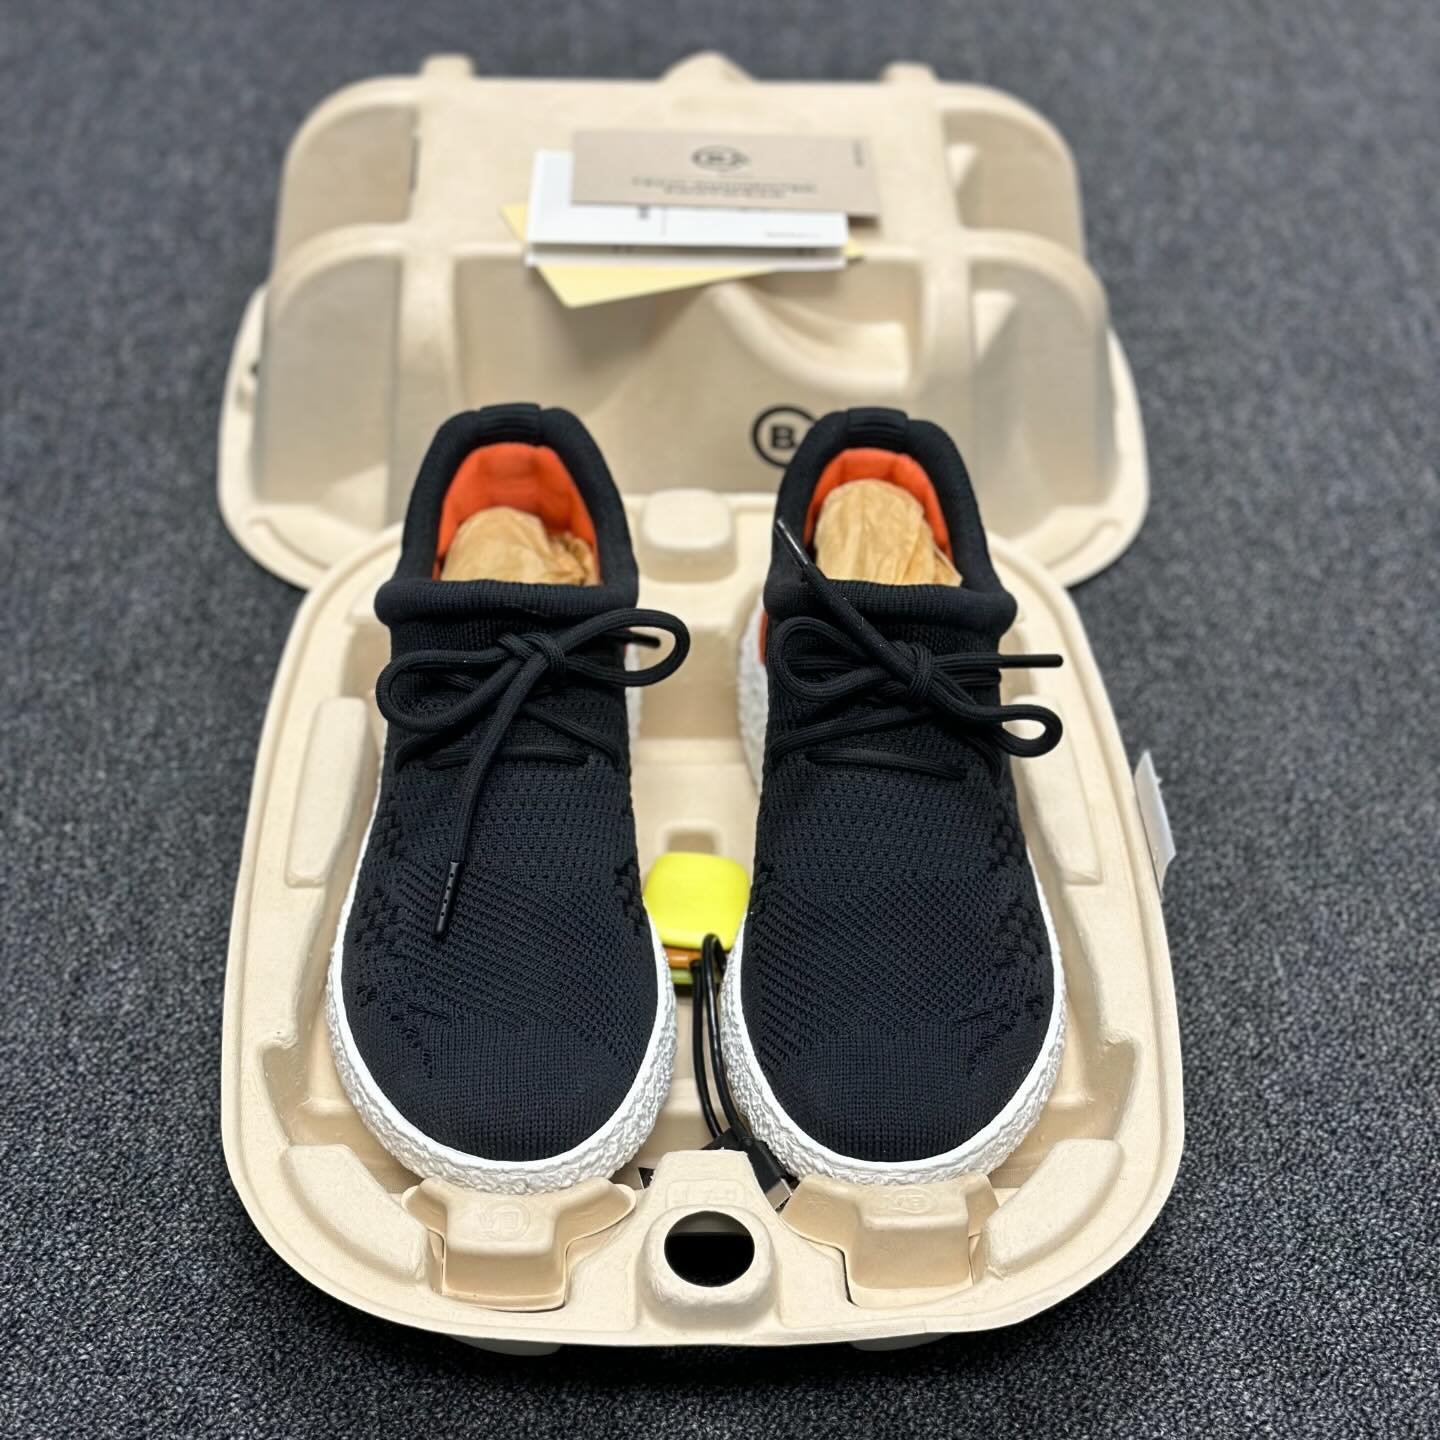 I was happy these turned up in the mail today. They look cool, fit great and feel good. And the multi-colored modules are a nice touch. Unfortunately the tech augmented part escaped me. I couldn&rsquo;t sign in to the app. @balistonfootwear I sent a 